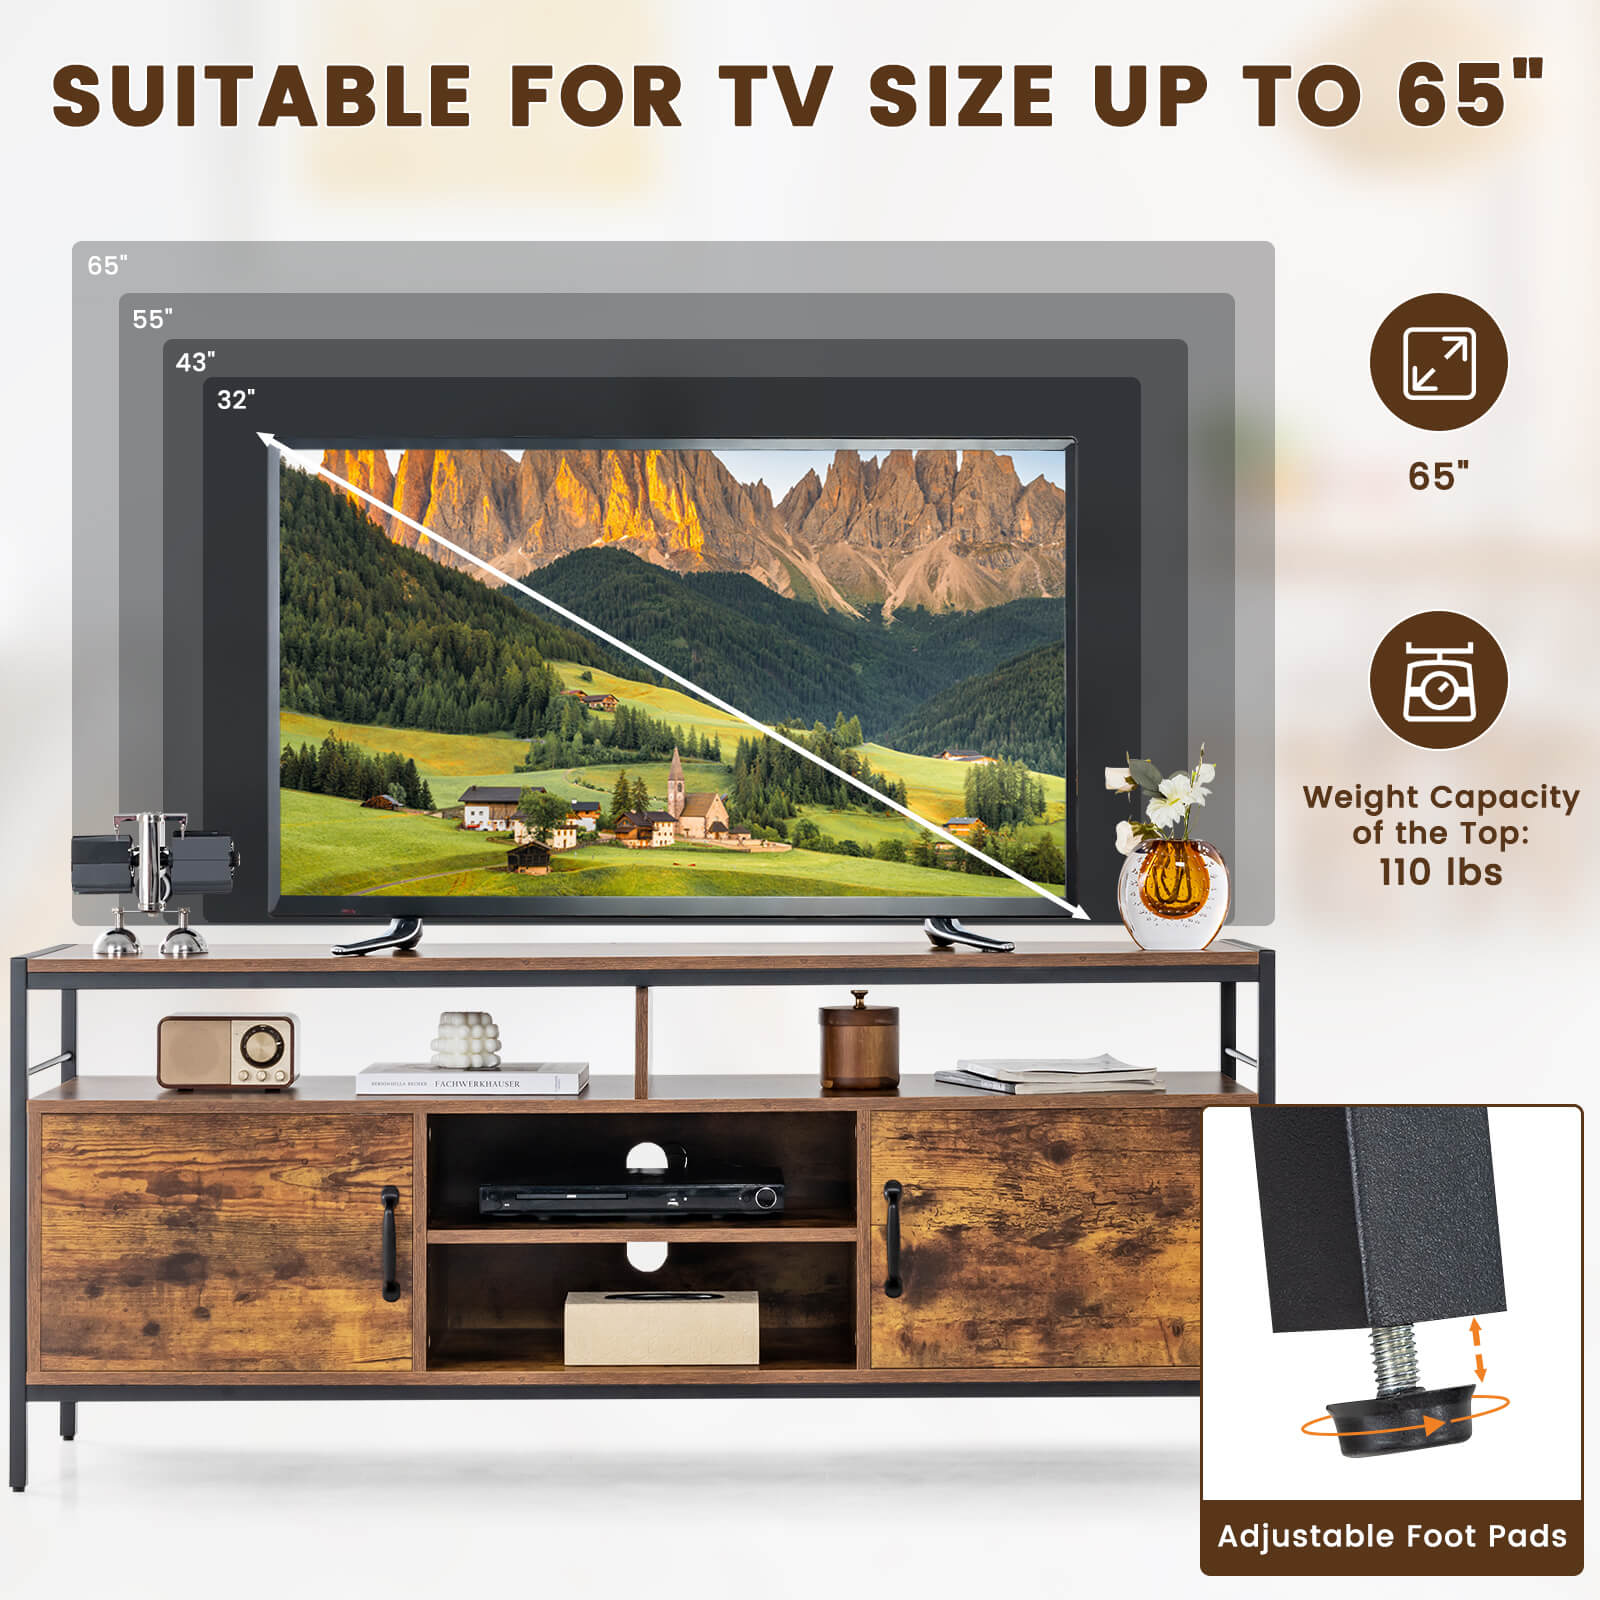 Industrial_TV_Stand_with_Adjustable_Storage_Shelf_for_TVs_up_to_65_Inch-4.jpg